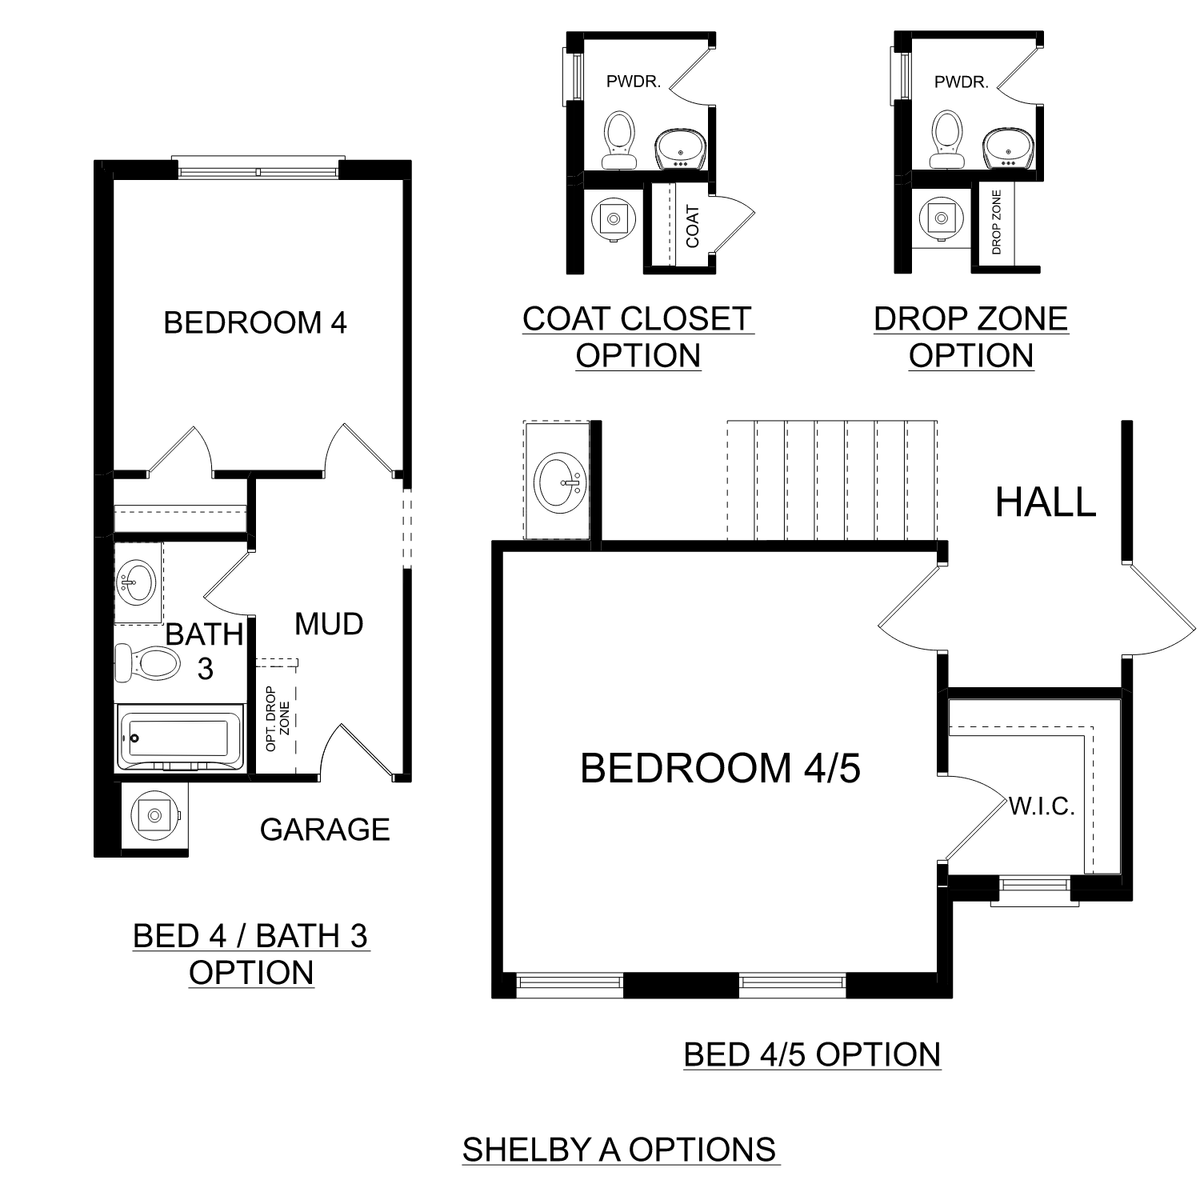 3 - The Shelby A buildable floor plan layout in Davidson Homes' Hollon Meadows community.